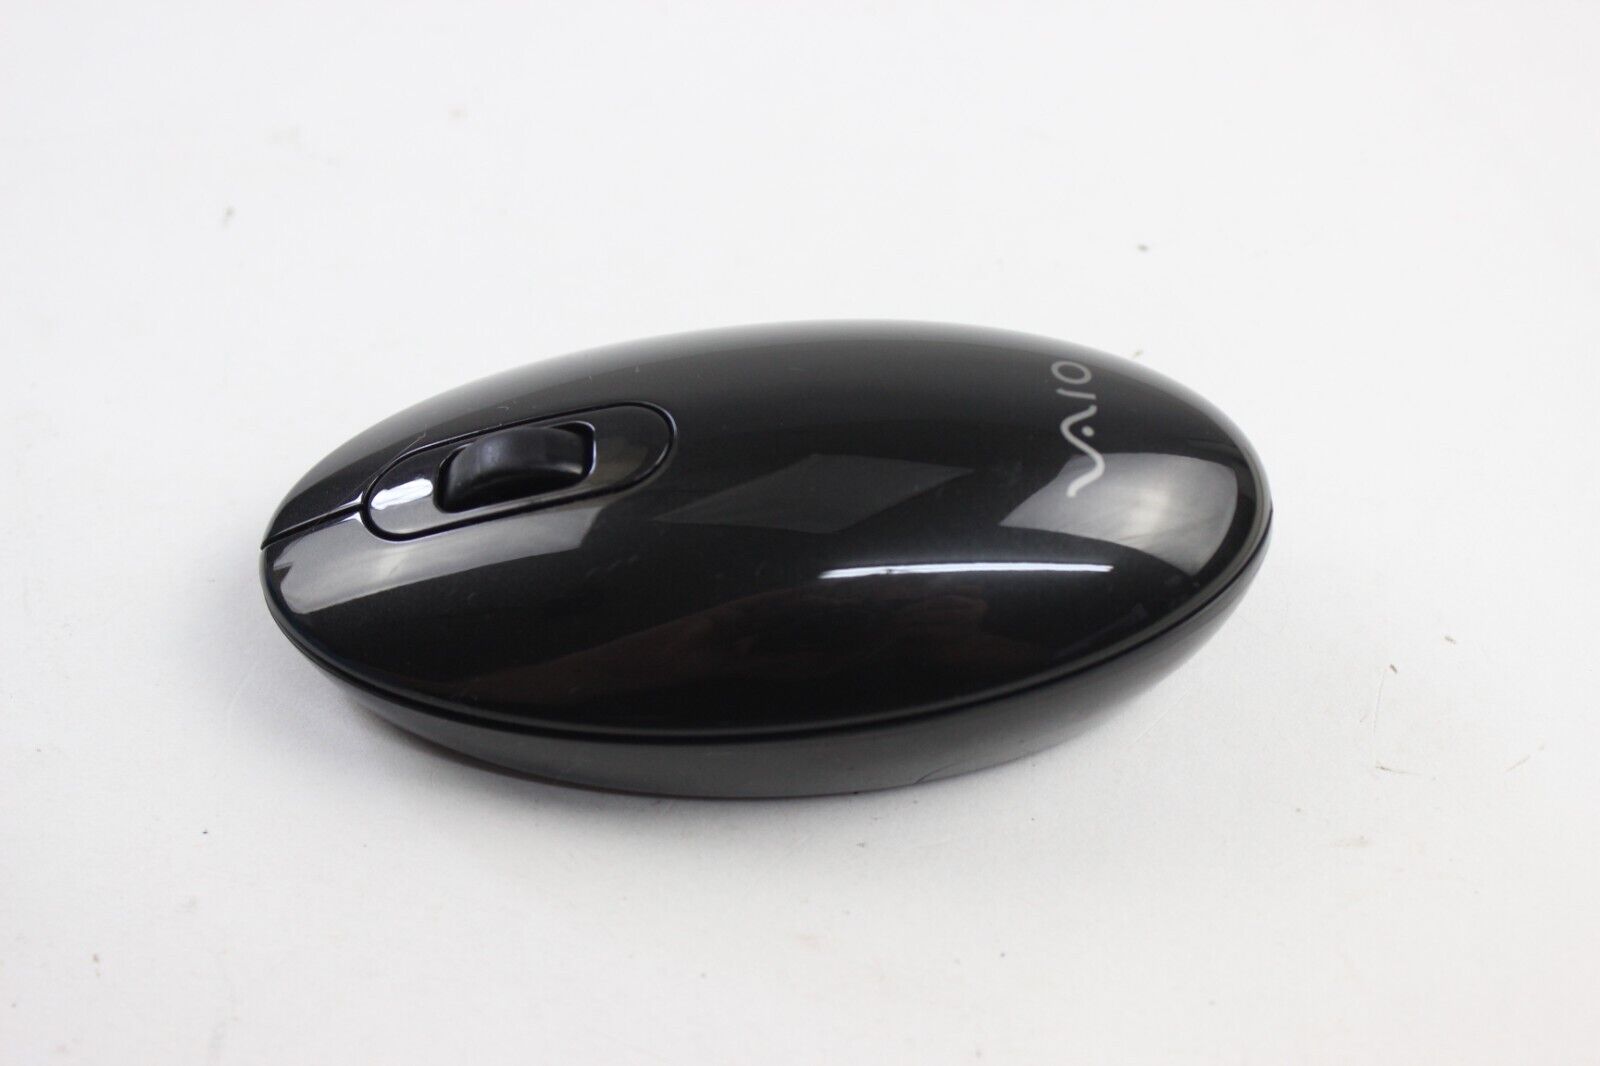 Sony Vaio VGP-WMS30 2.4GHZ Black Wireless Mouse - NO DONGLE